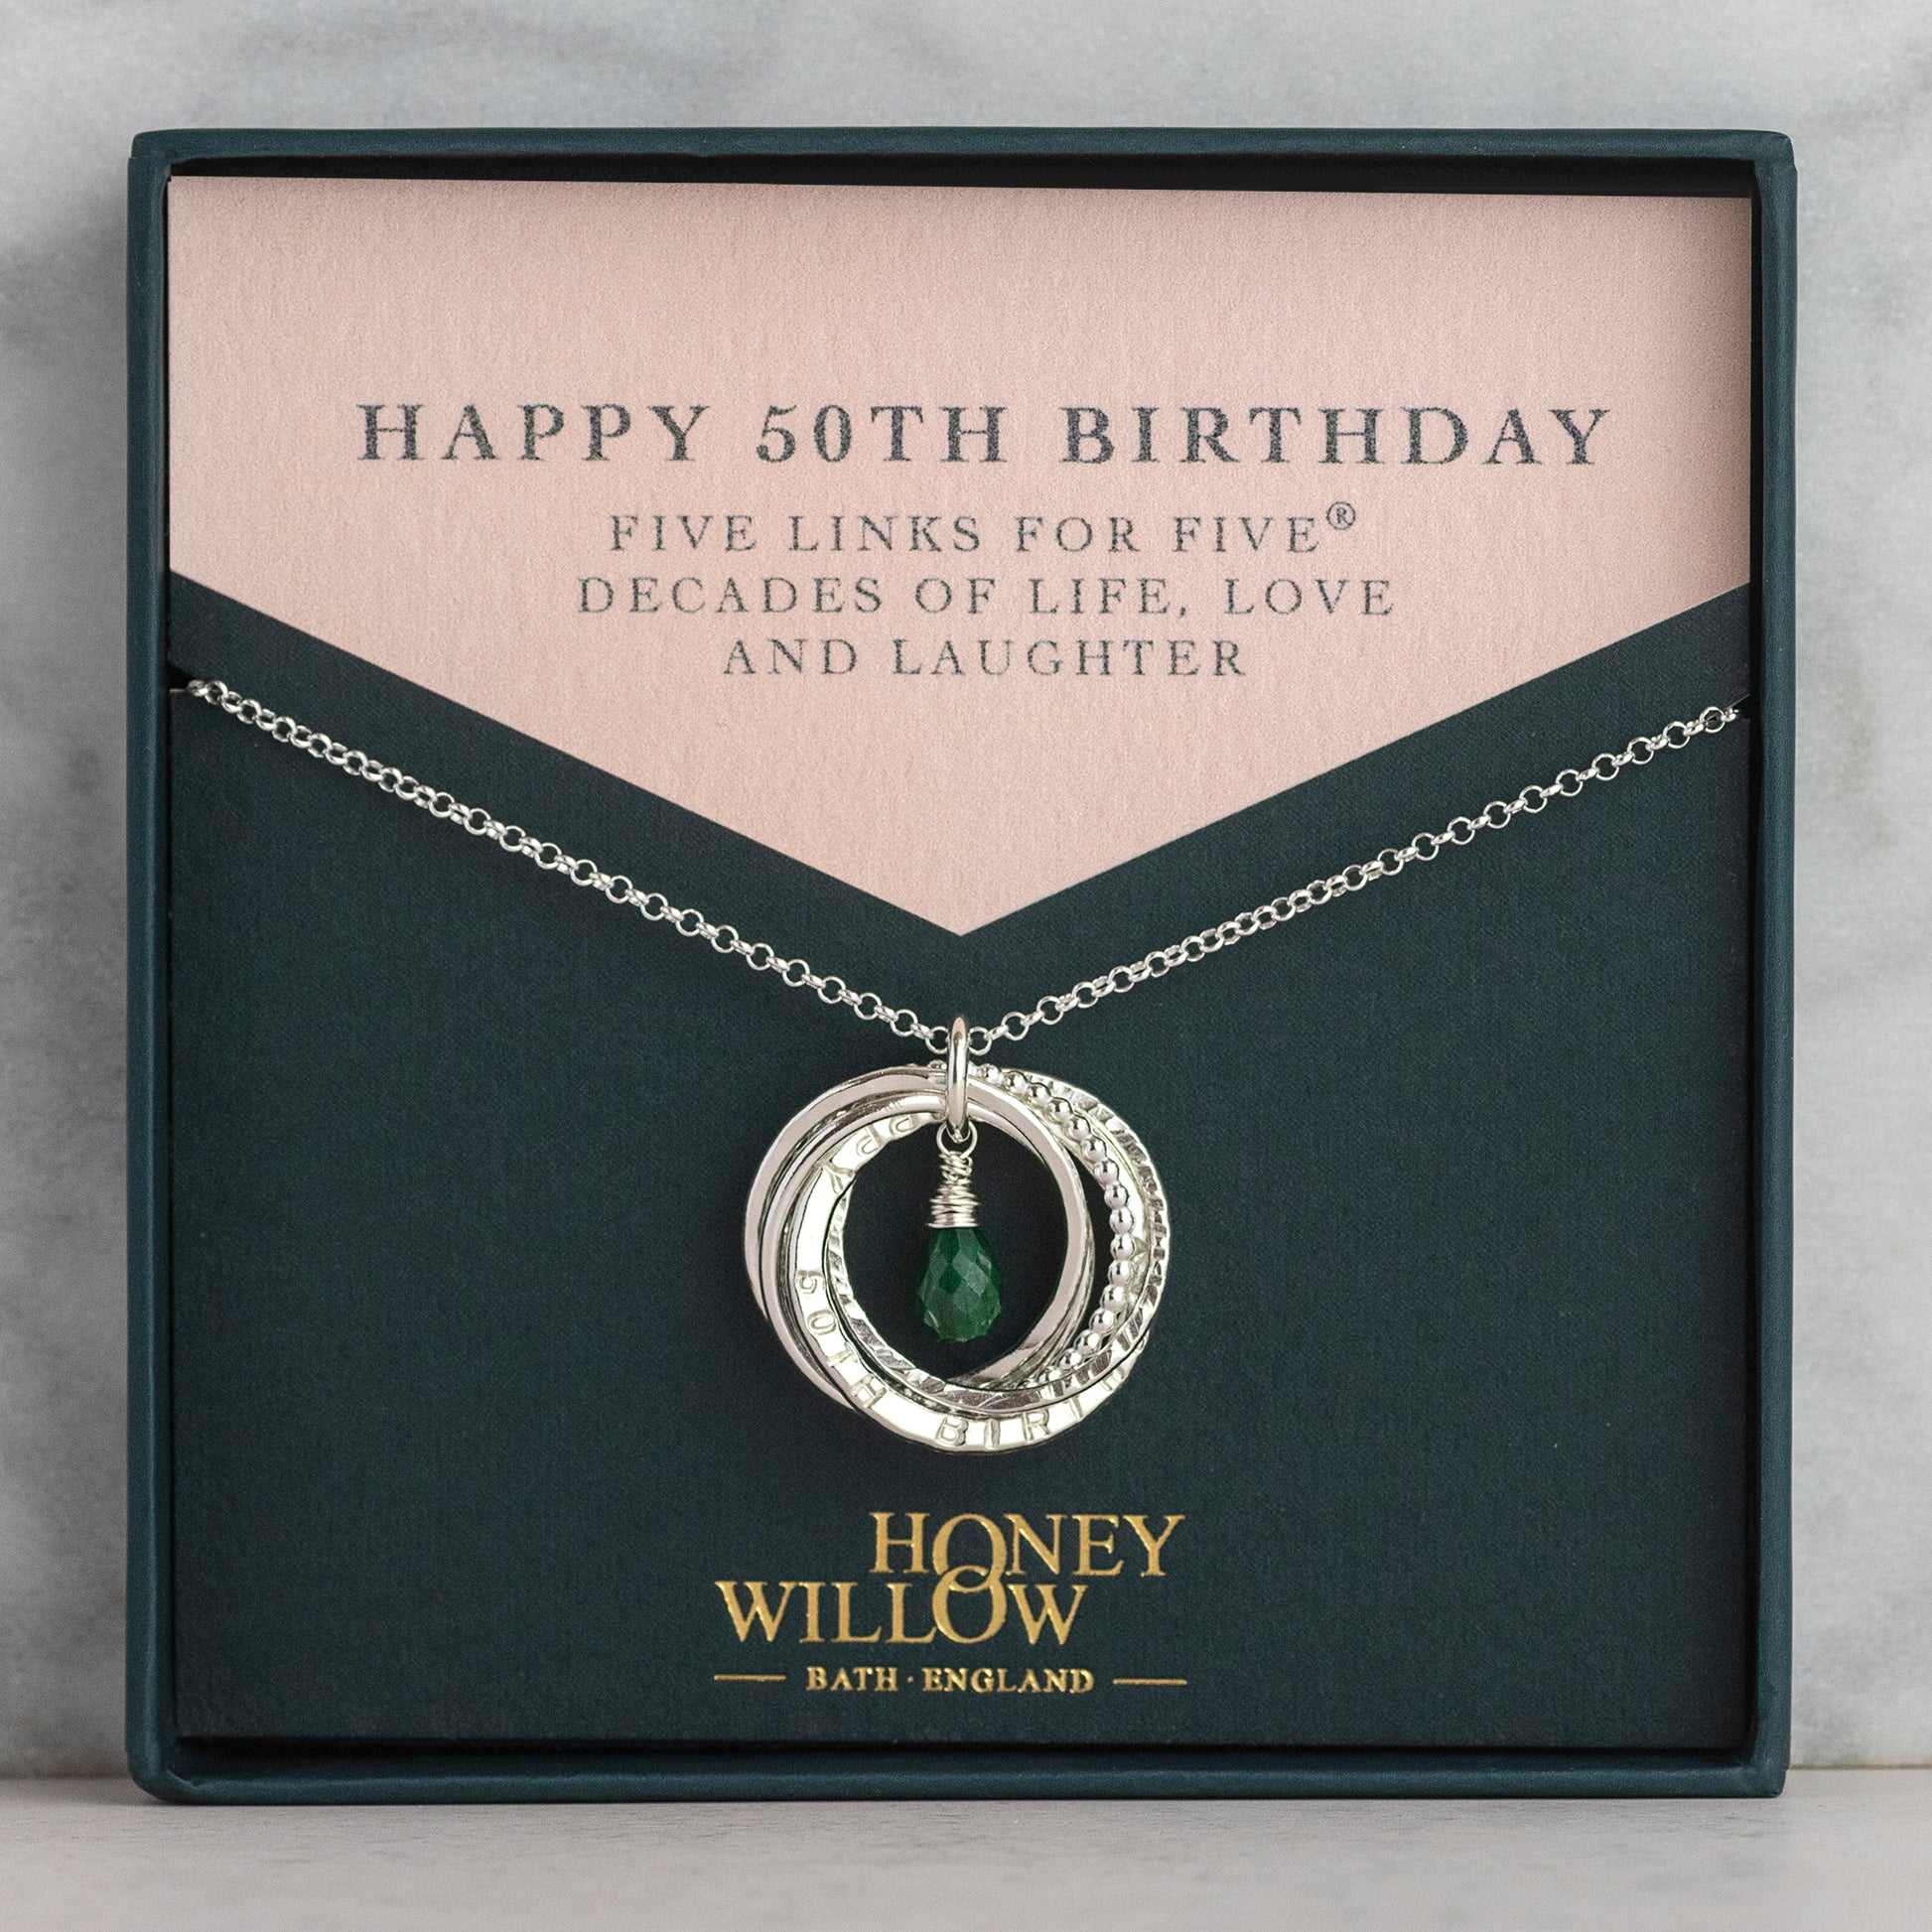 Personalised 50th Birthday Birthstone Necklace - Hand-Stamped - The Original 5 Links for 5 Decades Necklace - Silver